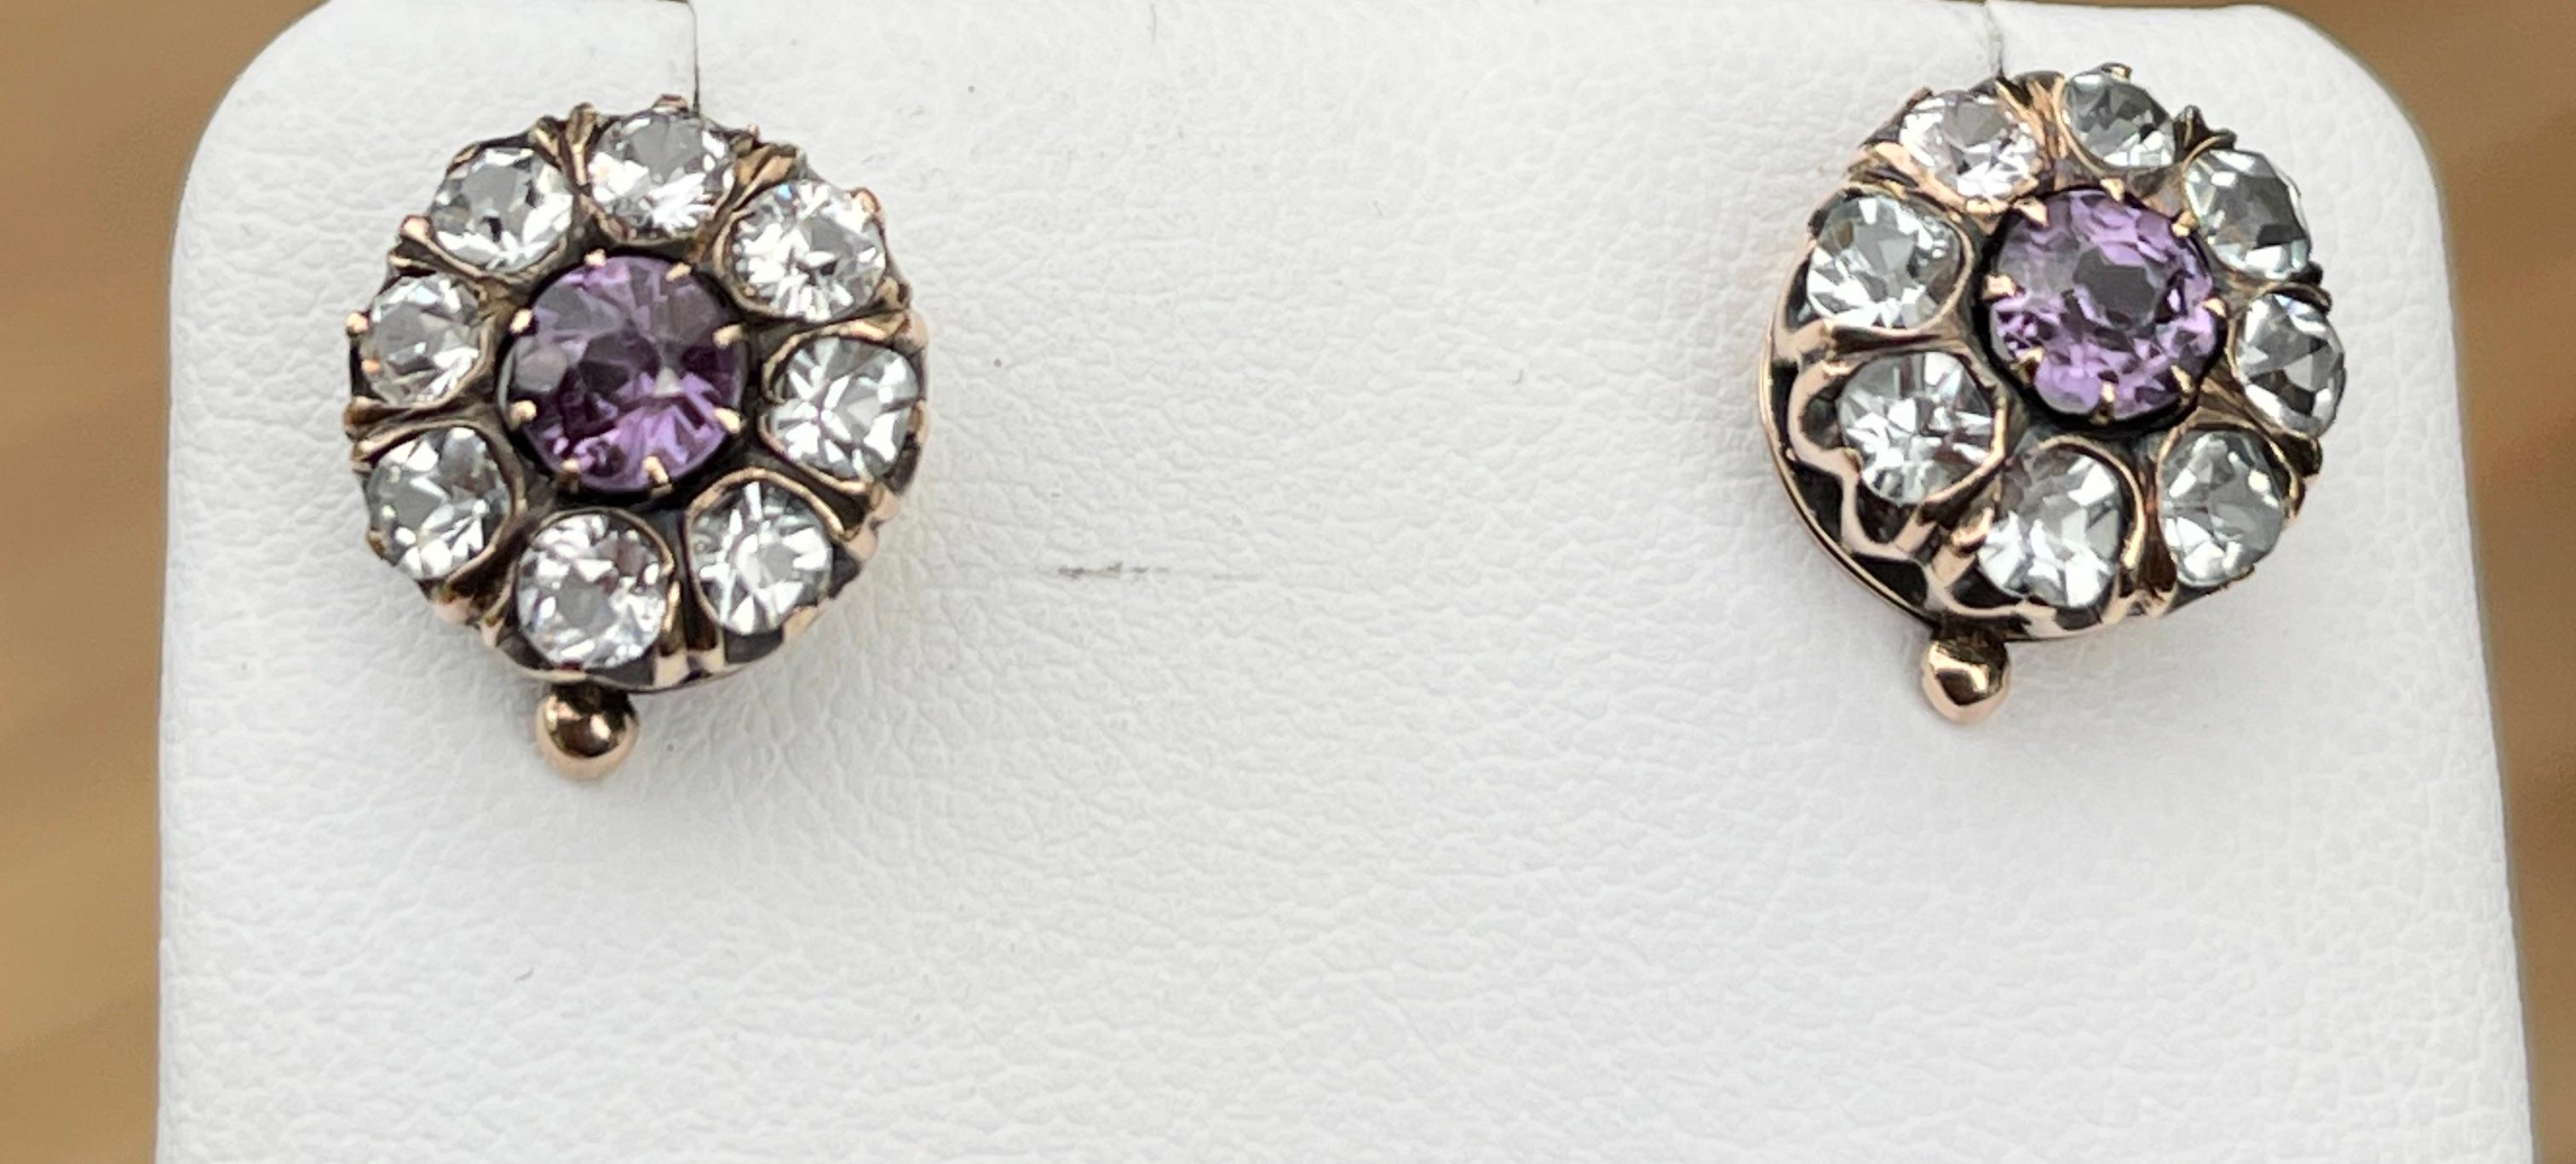 Antique 10ct Rose Gold Alexandrite Dormeuse Earrings Circa 1920s Valued $3150 For Sale 5